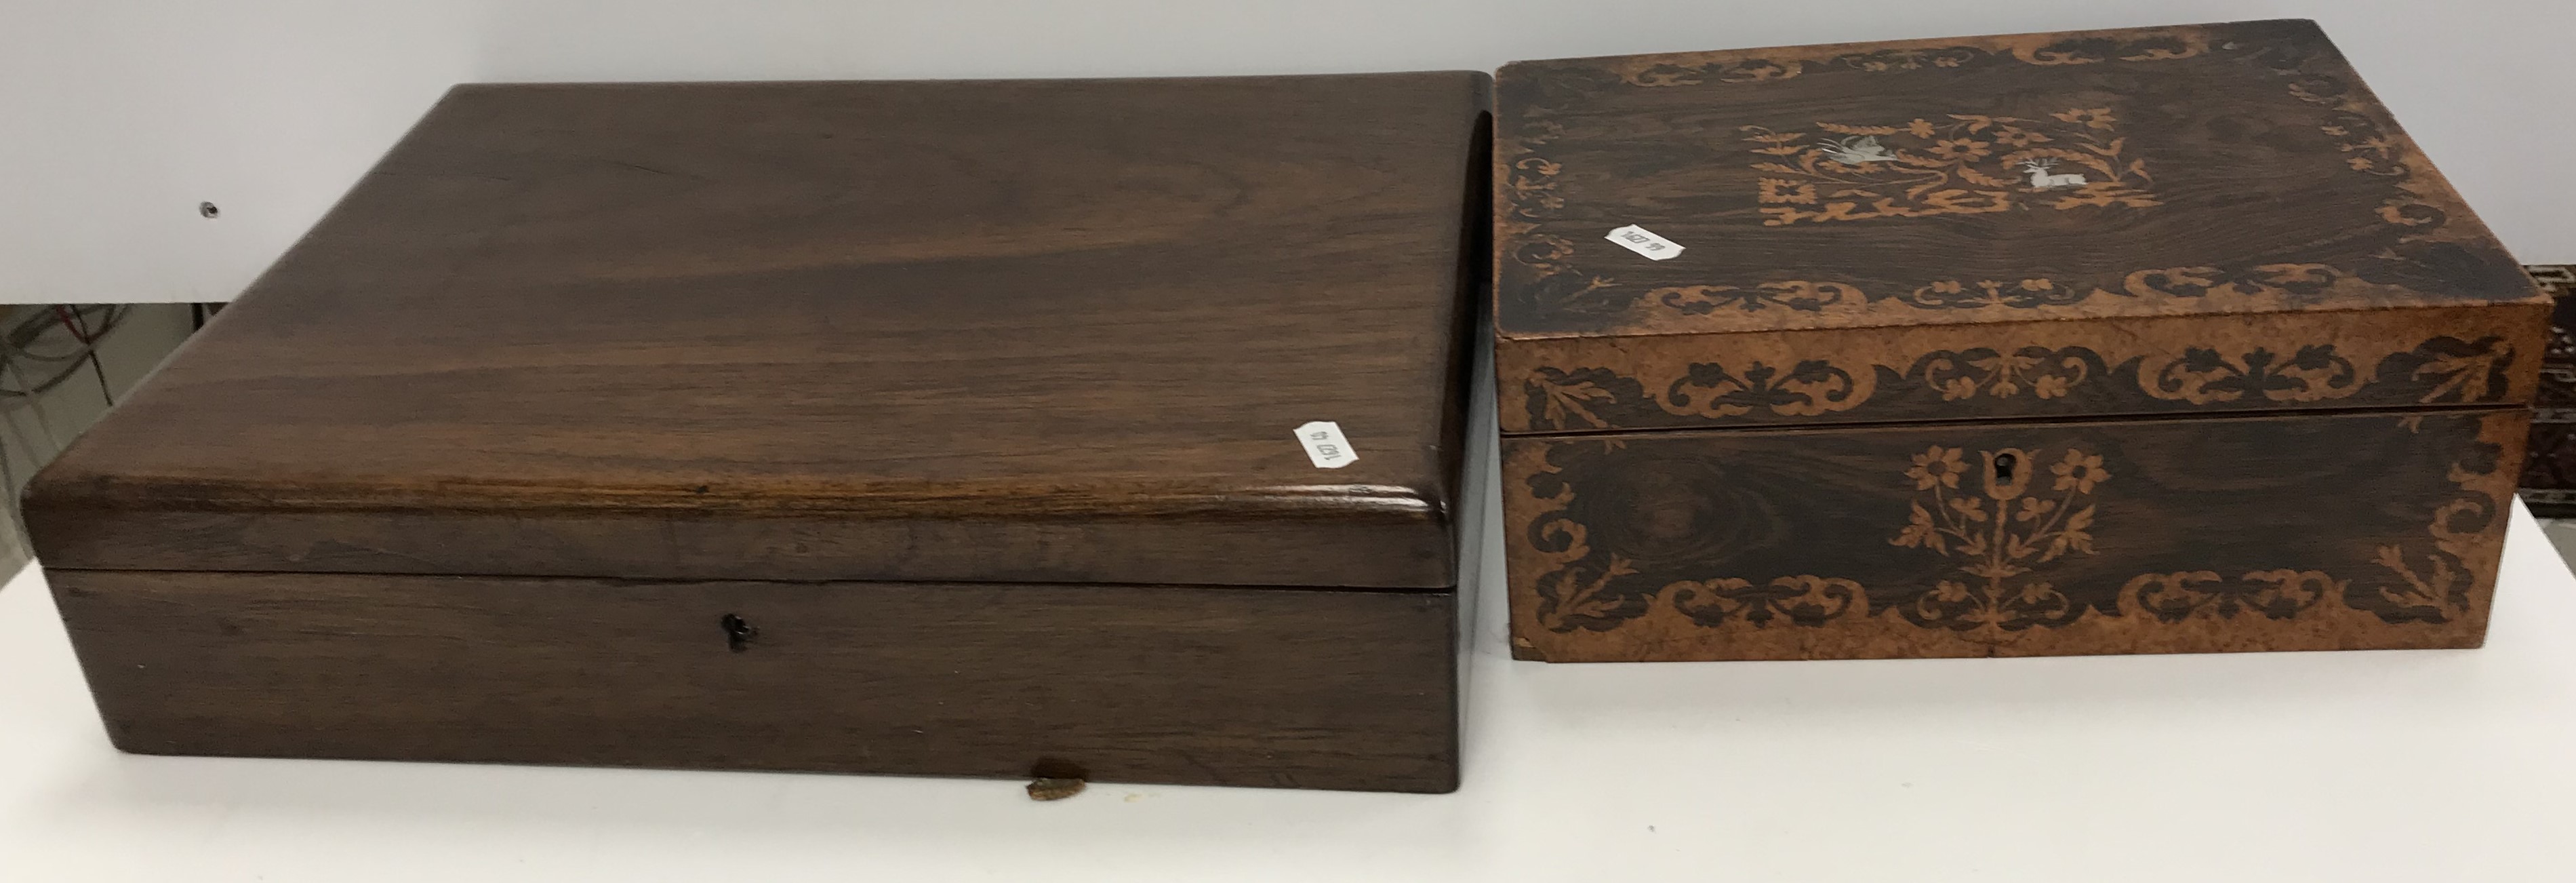 A Victorian rosewood and marquetry inlaid sewing box 28 cm x 20.3 cm x 11.